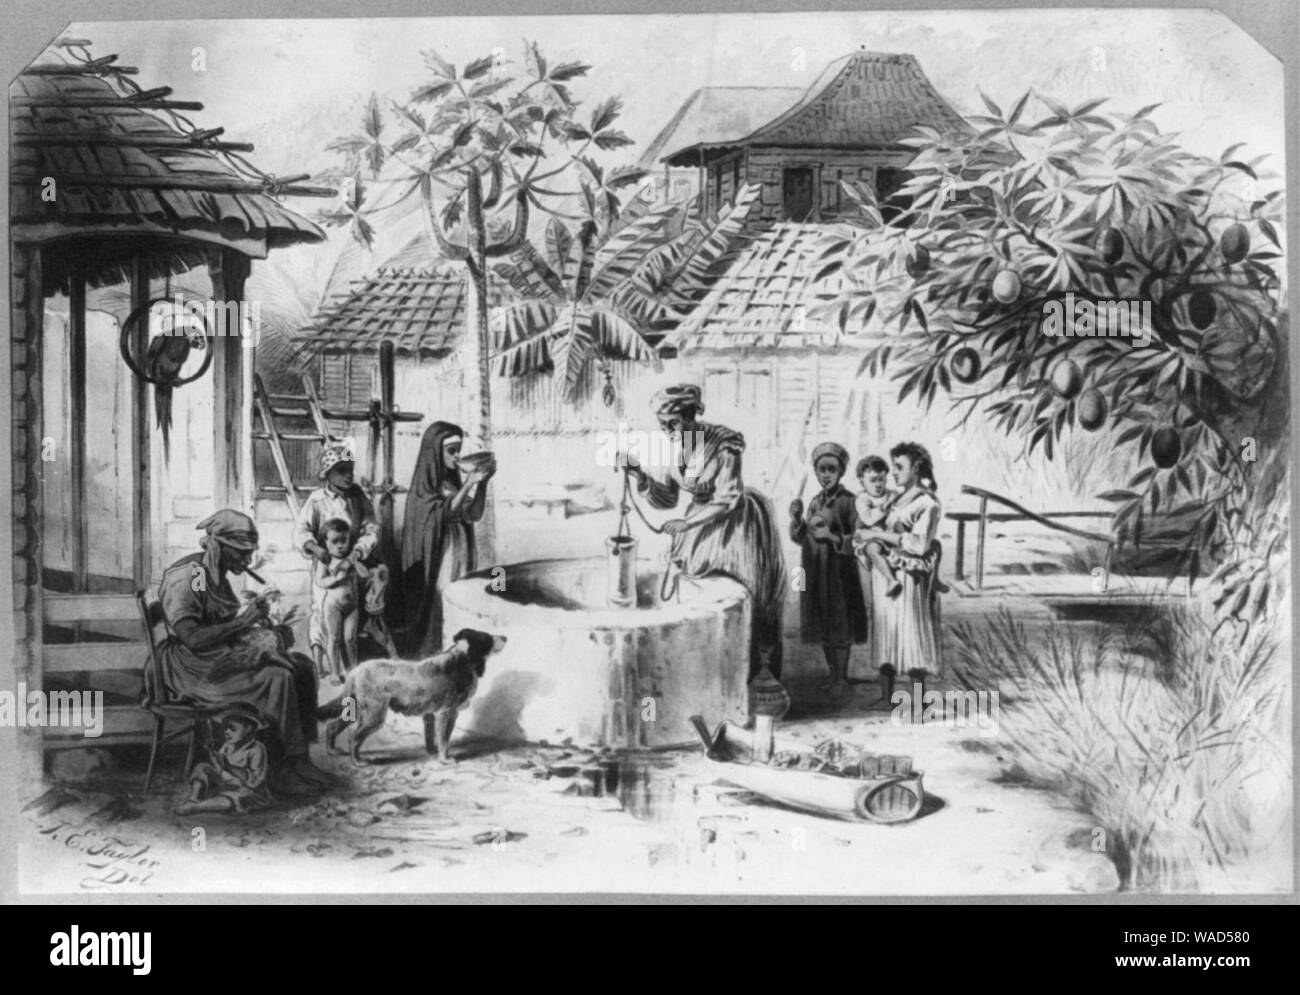 Dominican Republic, 1871)- Group of natives around a well in Samana City Stock Photo